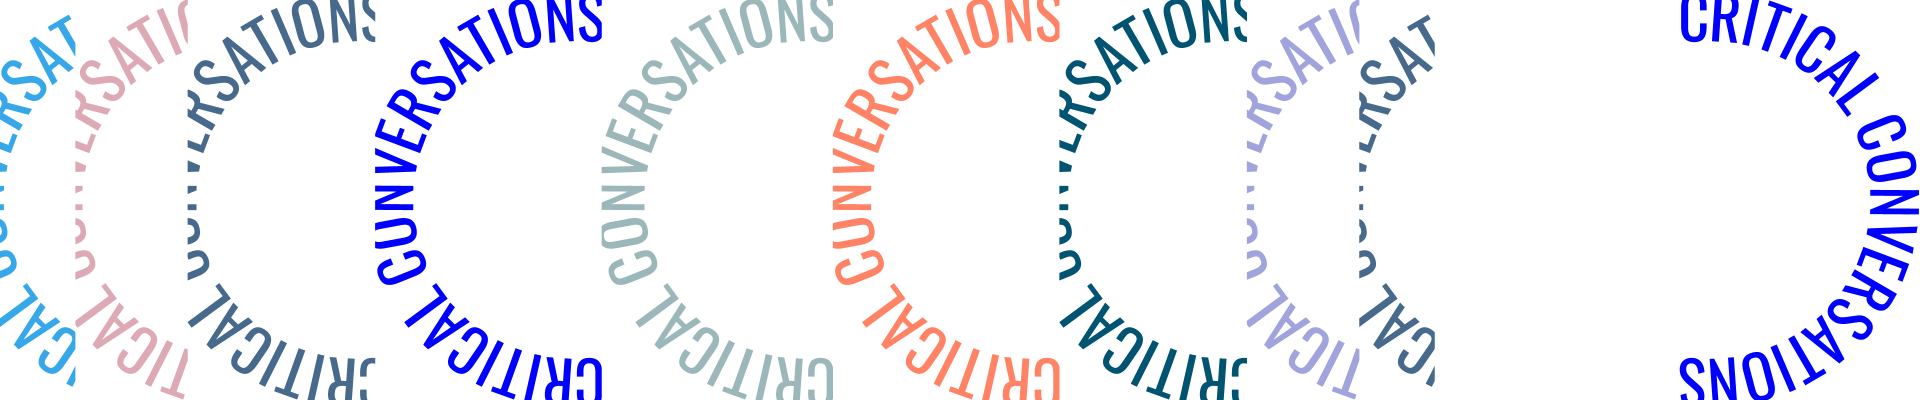 Critical Conversations logo repeated in several pastel colors